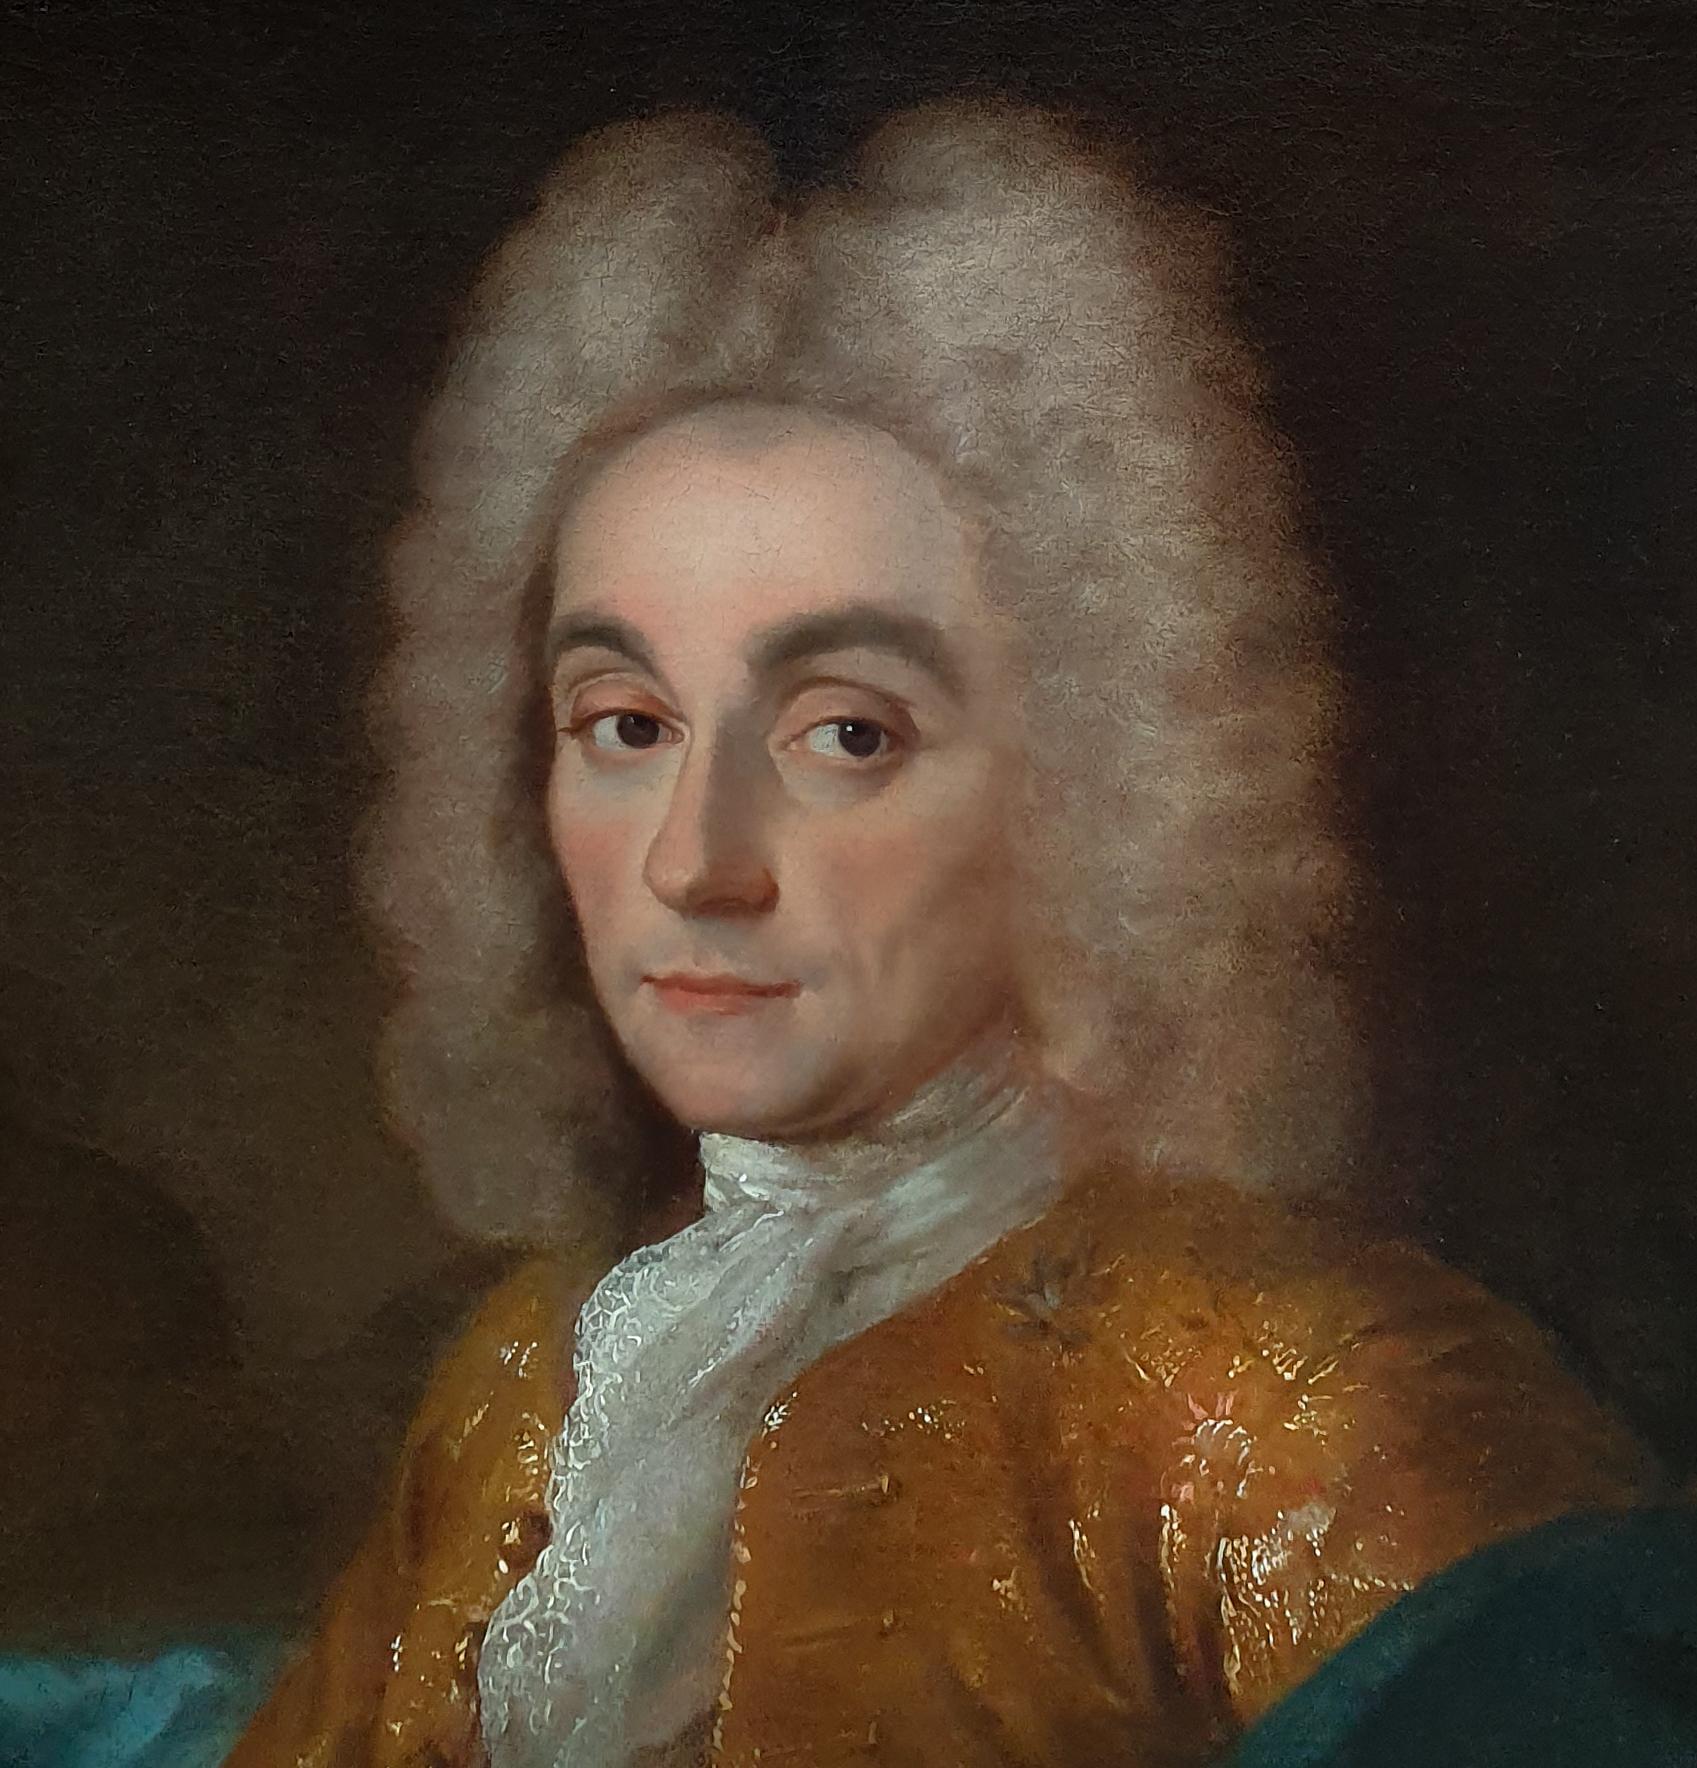 This fine portrait depicts a member of French aristocracy – the portrait passed through the French noble family, Duchy of La Vallière, for over 200 years until it was sold in the 1920’s.  Painted circa 1720 it is a charming example from one of